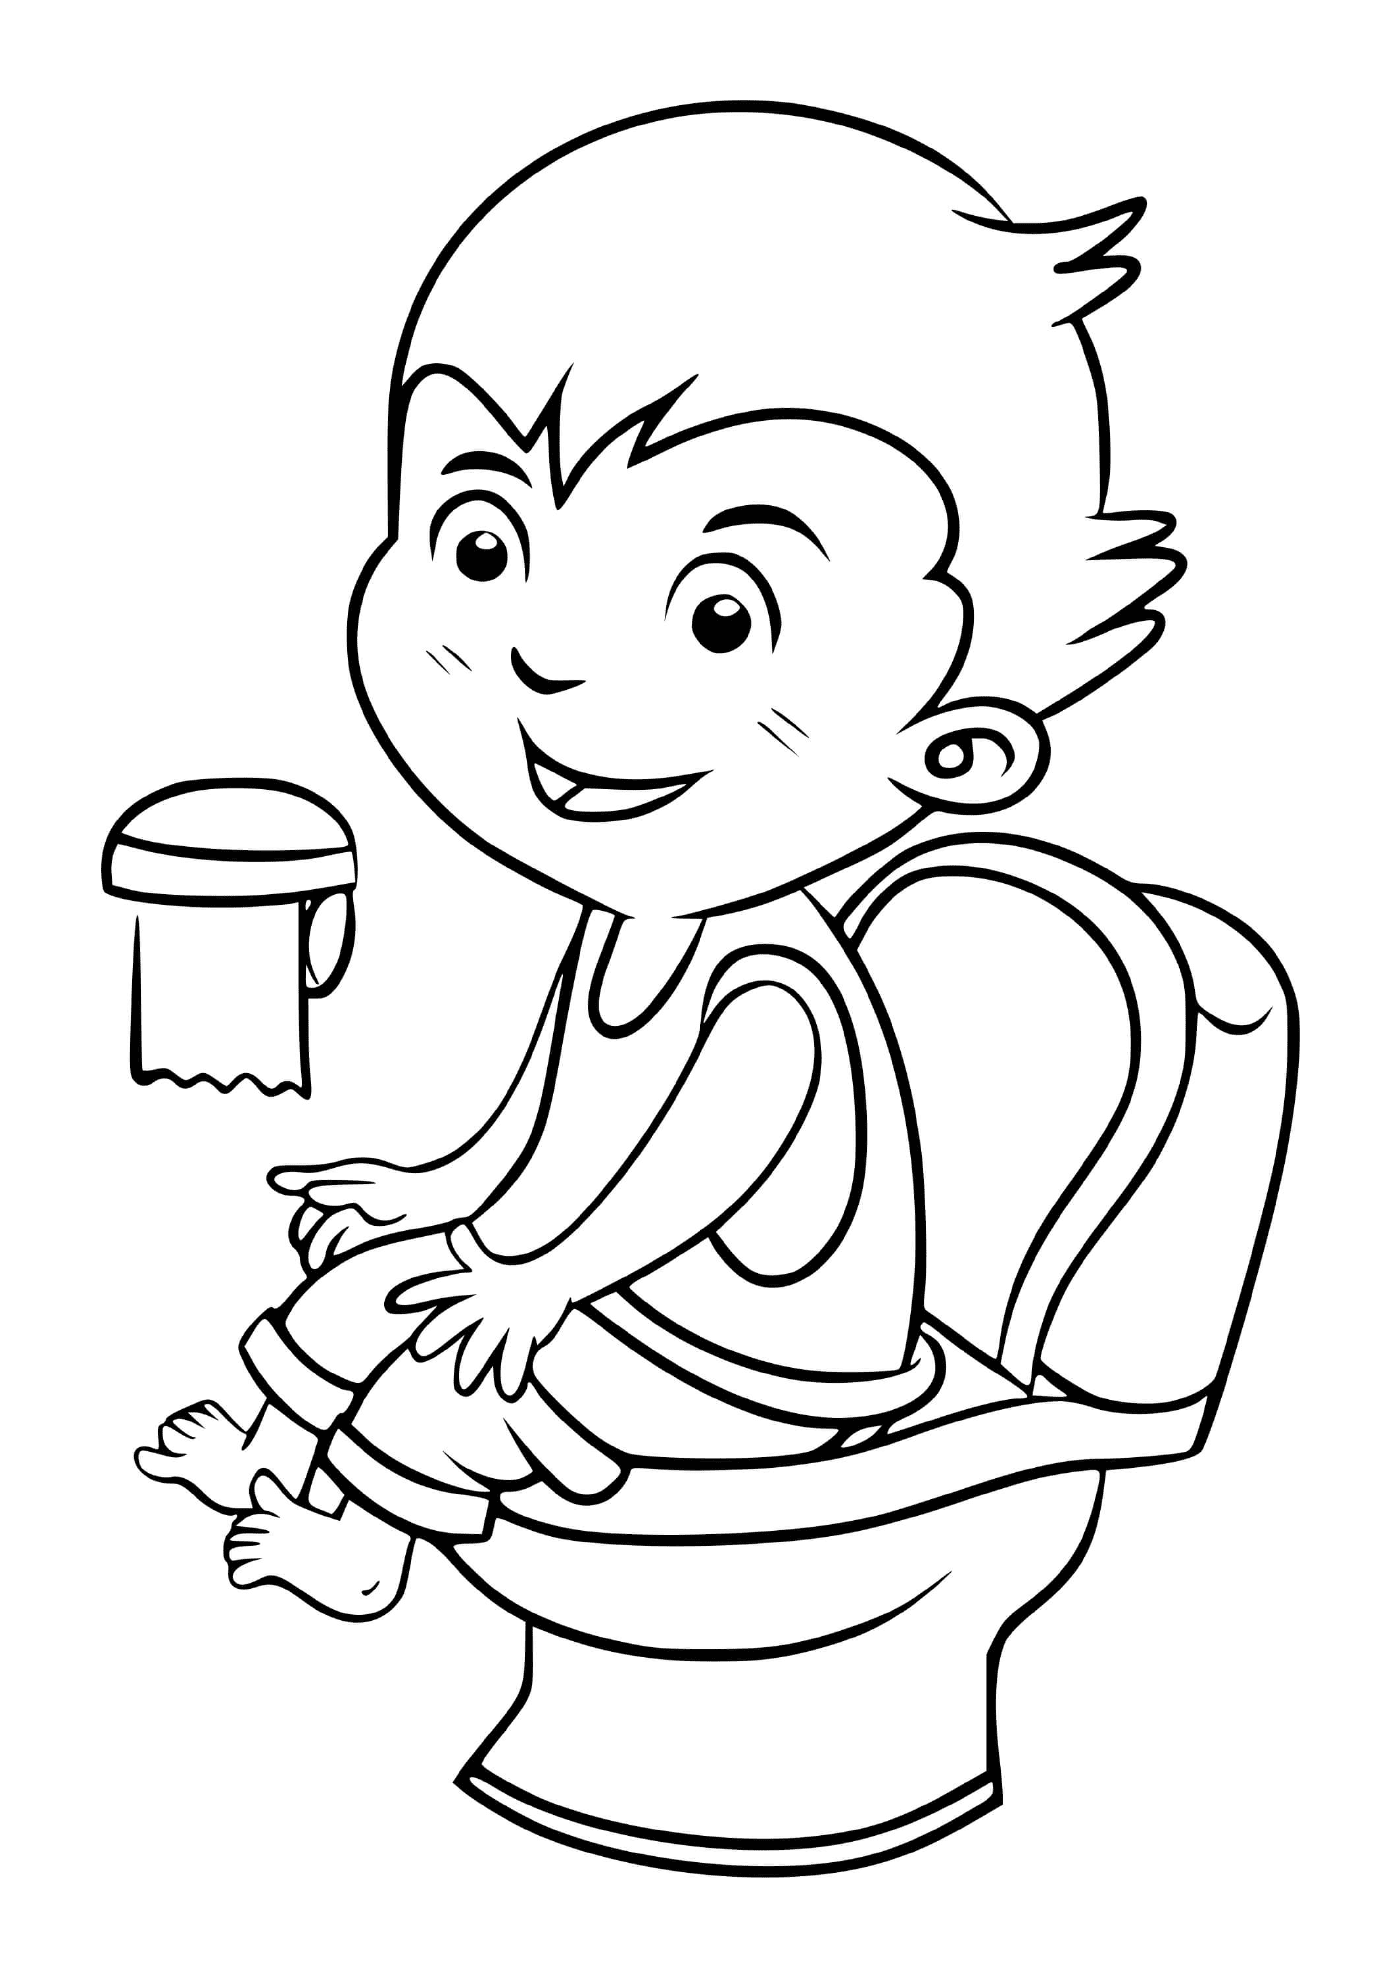  A child goes to the bathroom to stay clean 